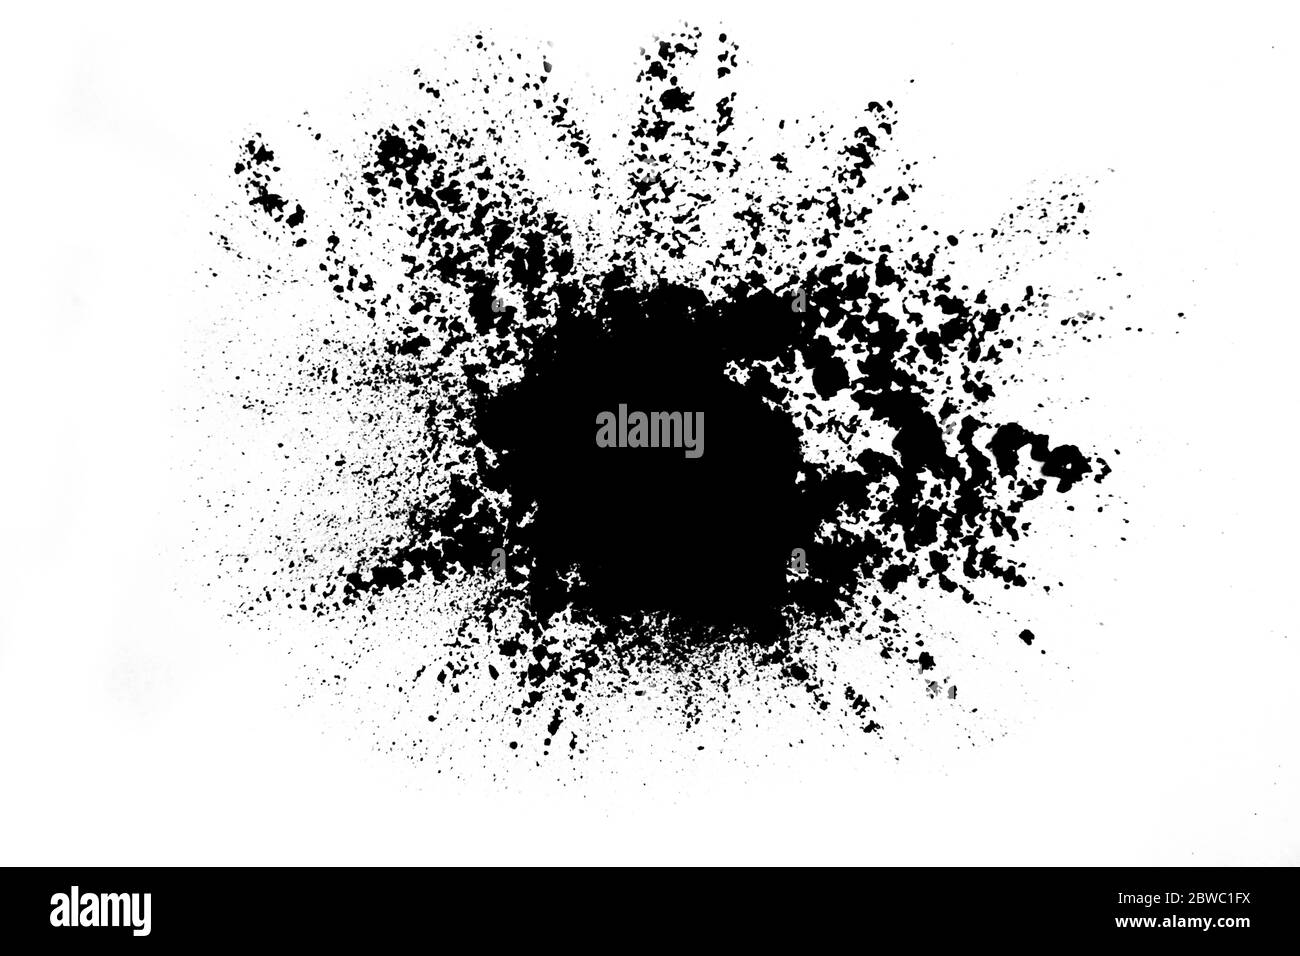 Design of a splash of black dry paint on a white background. Black mask design for photoshop Stock Photo